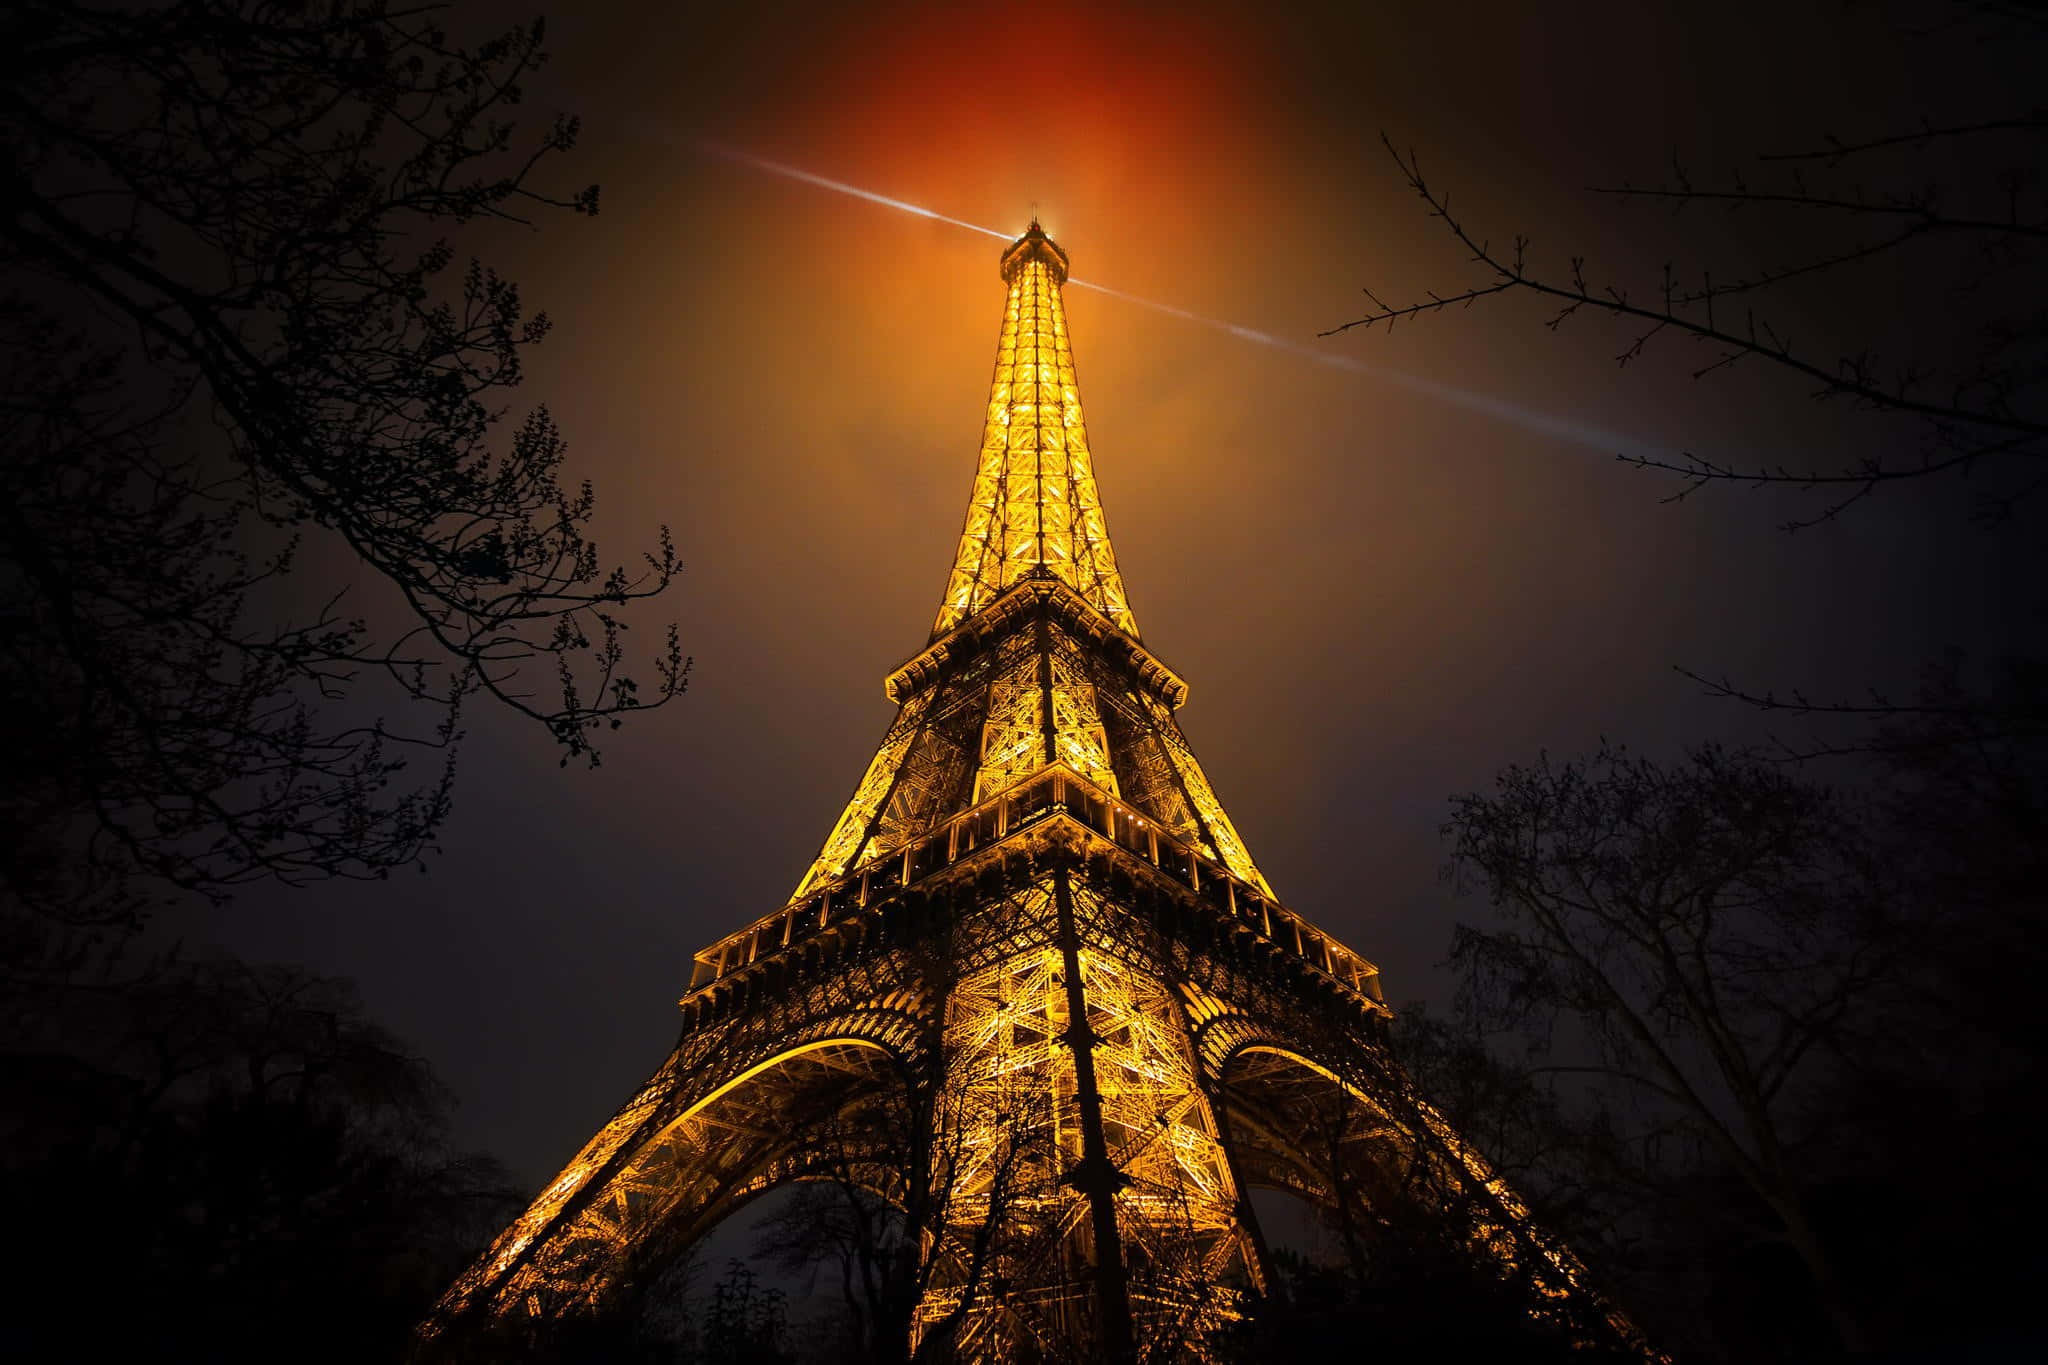 Enjoy the romantic city lights of Paris from the Eiffel Tower at night.